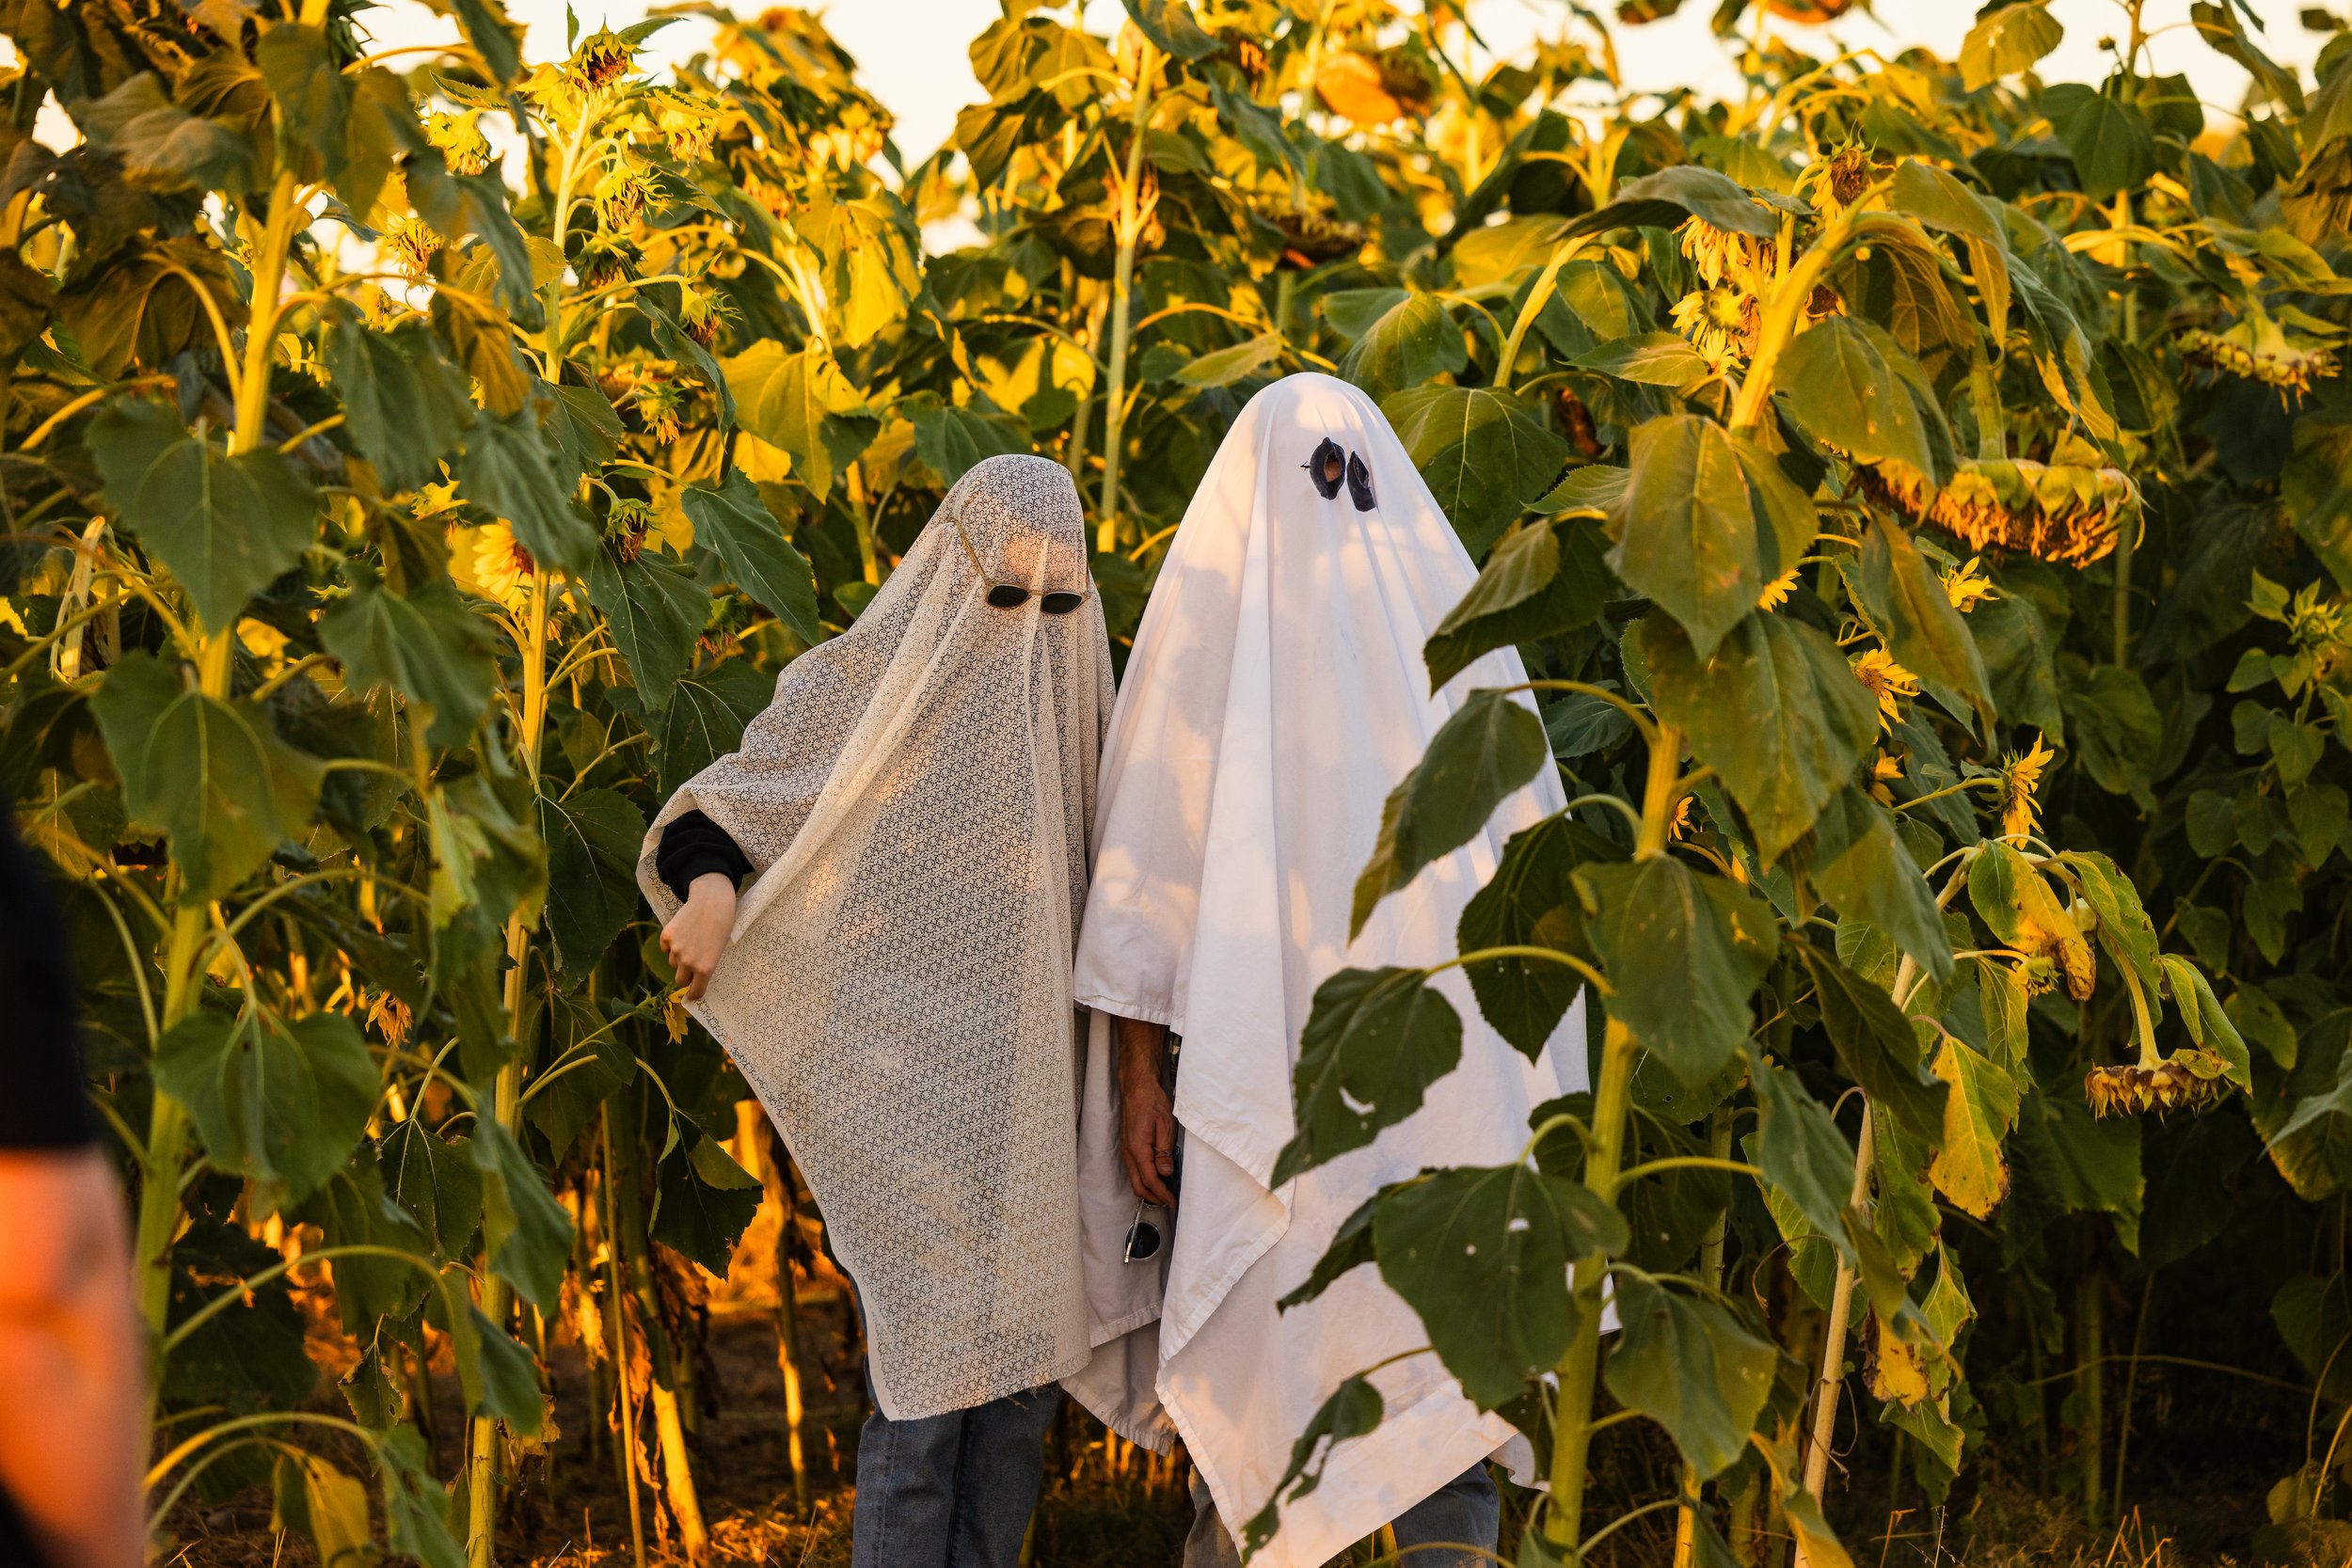  Ghosts in the sunflower field 